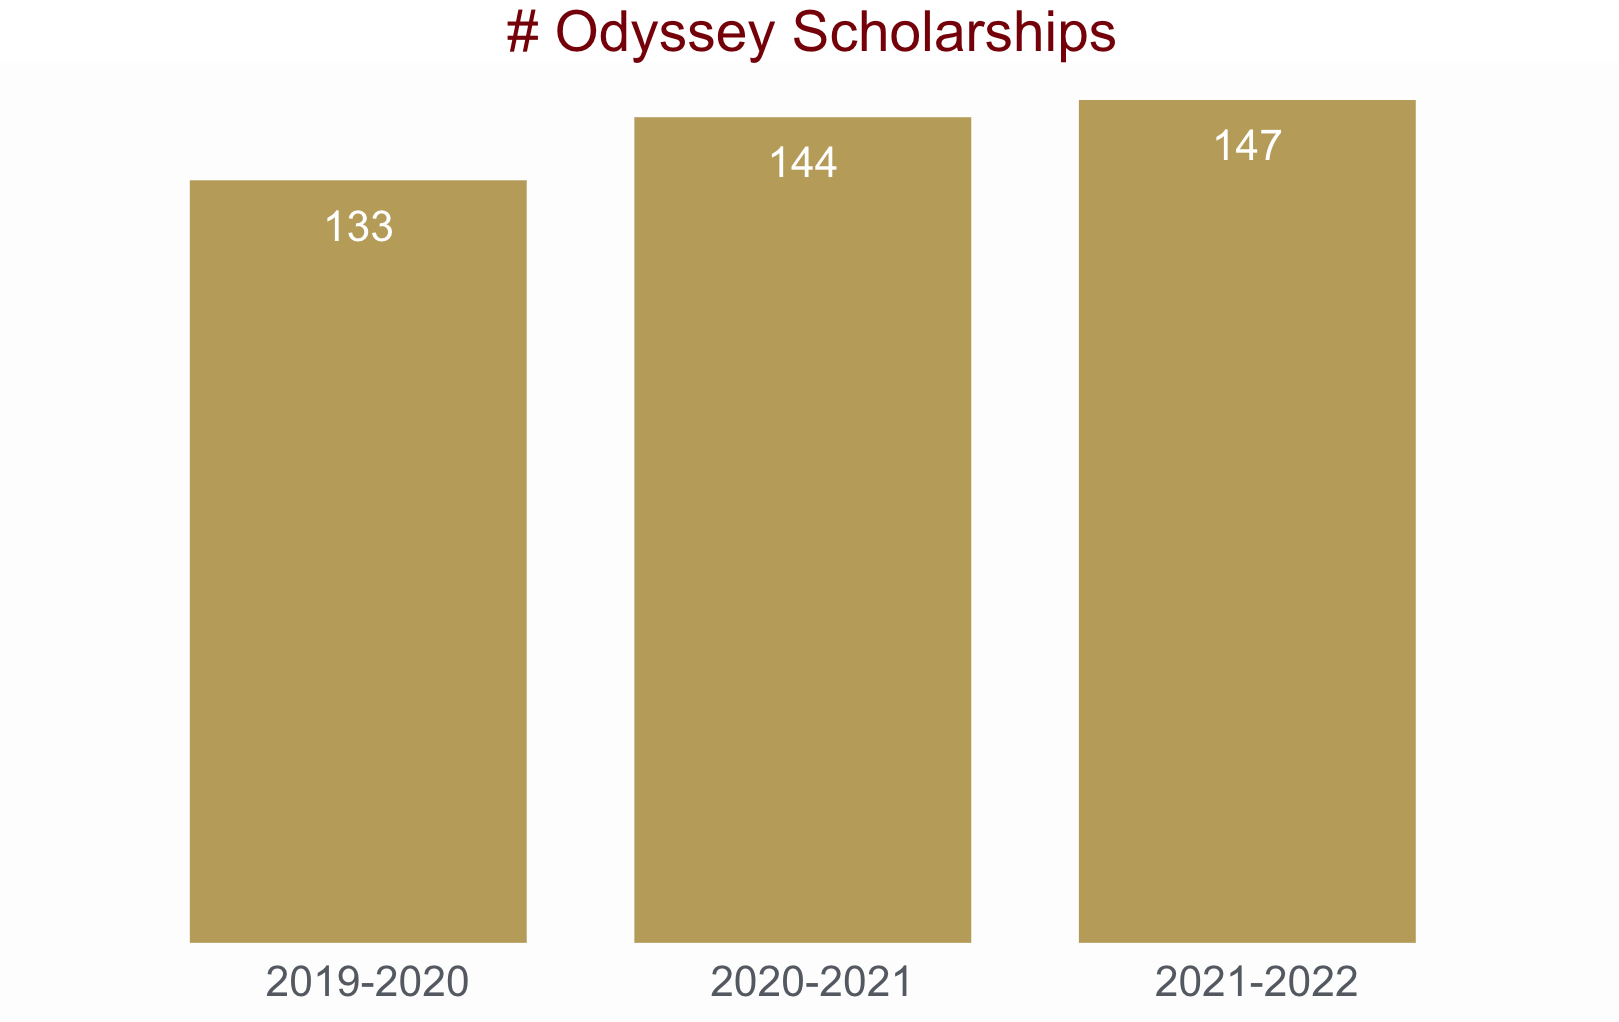 Bar chart showing the number of Odyssey Scholarships